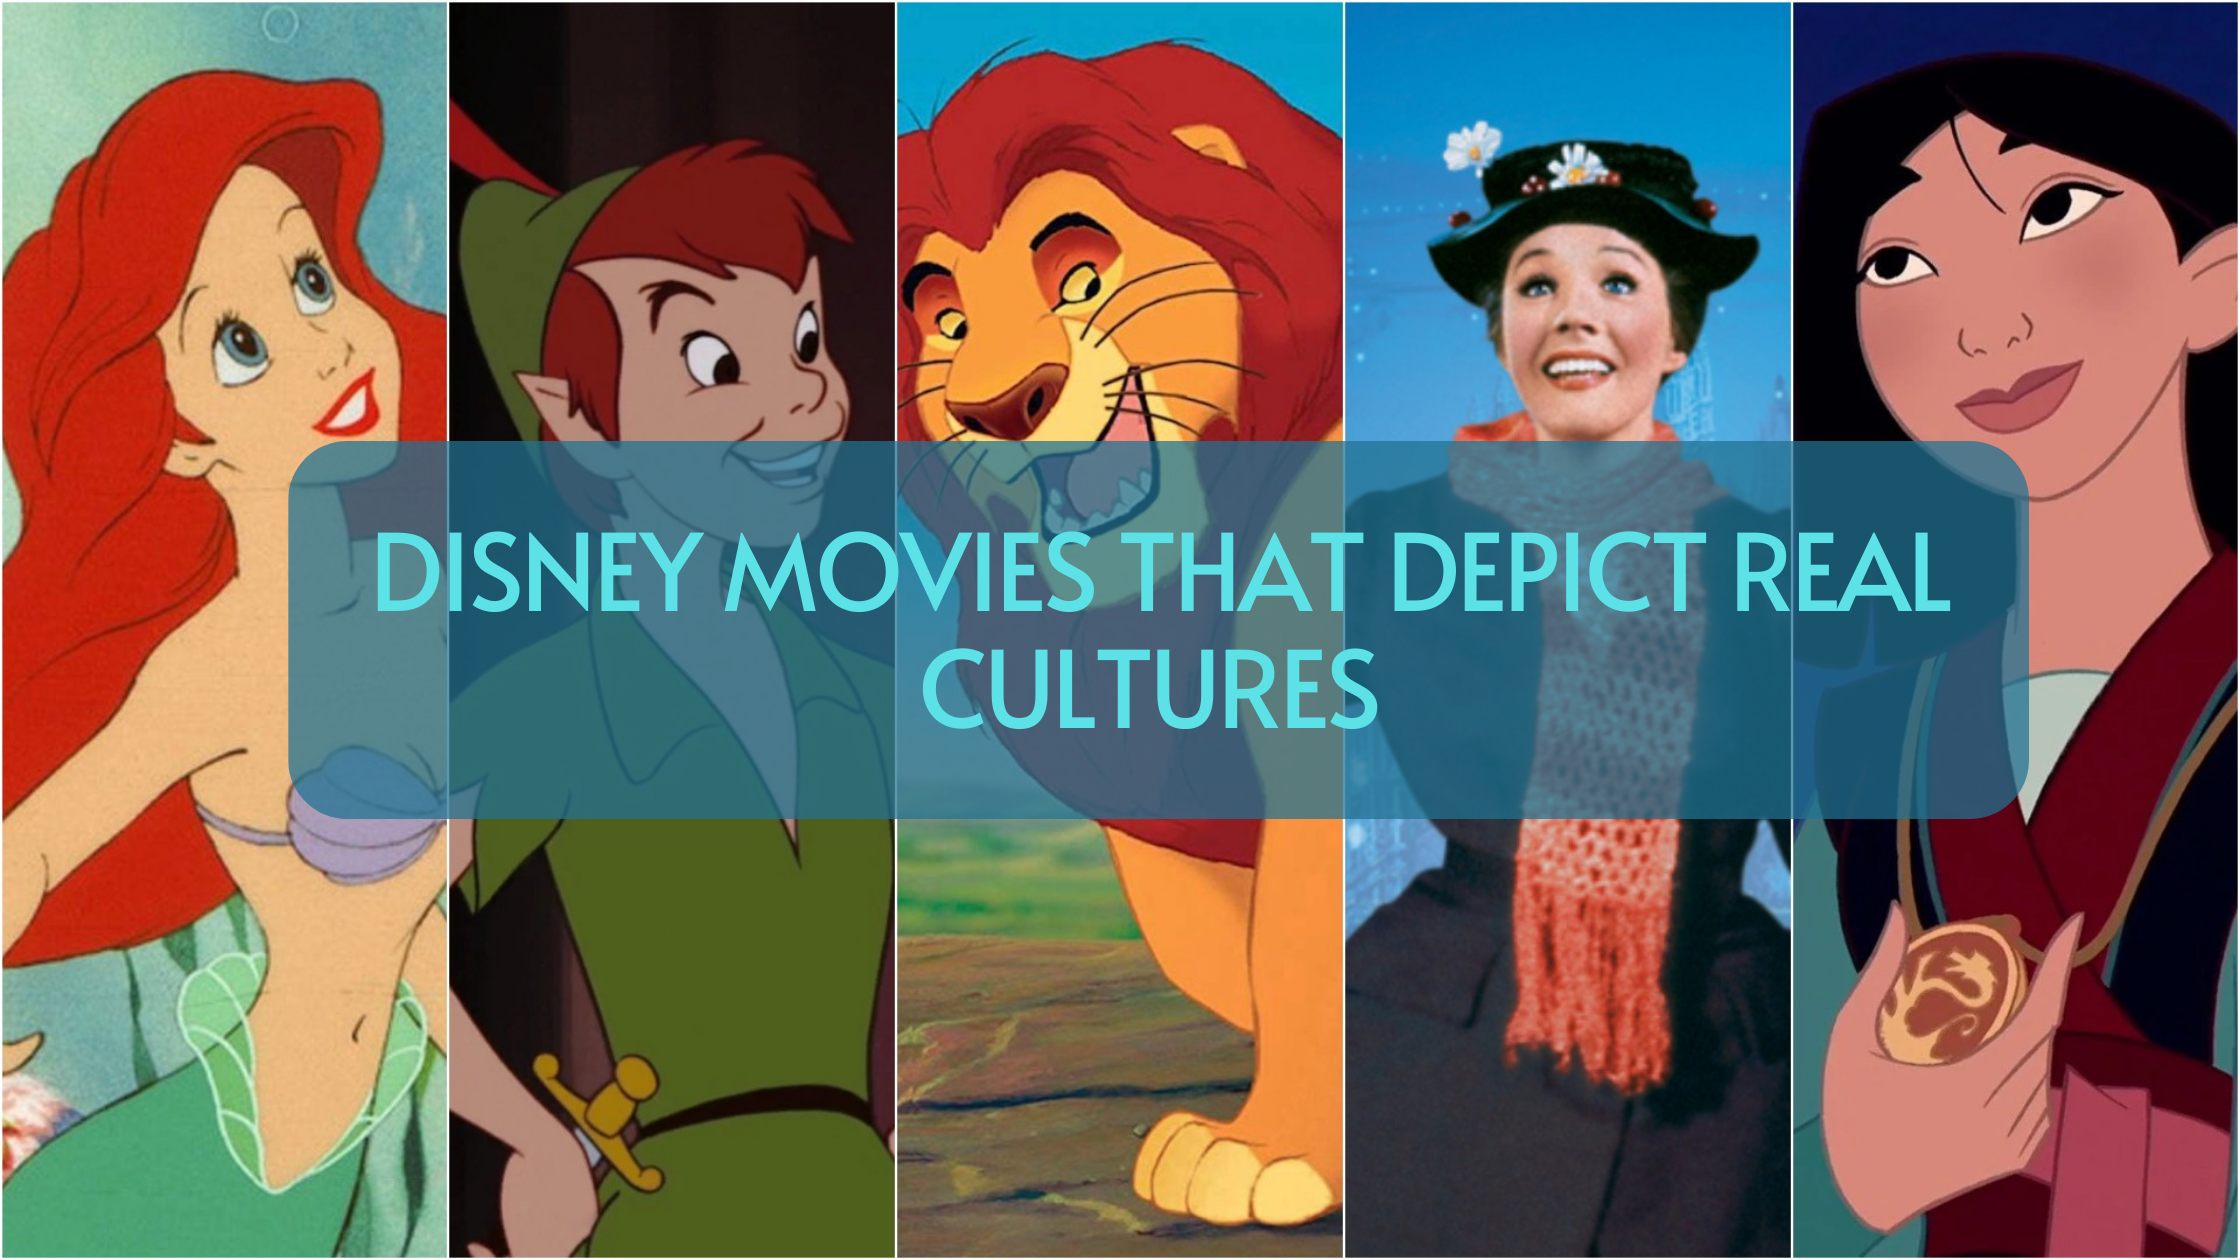 Disney movies that depict real cultures 